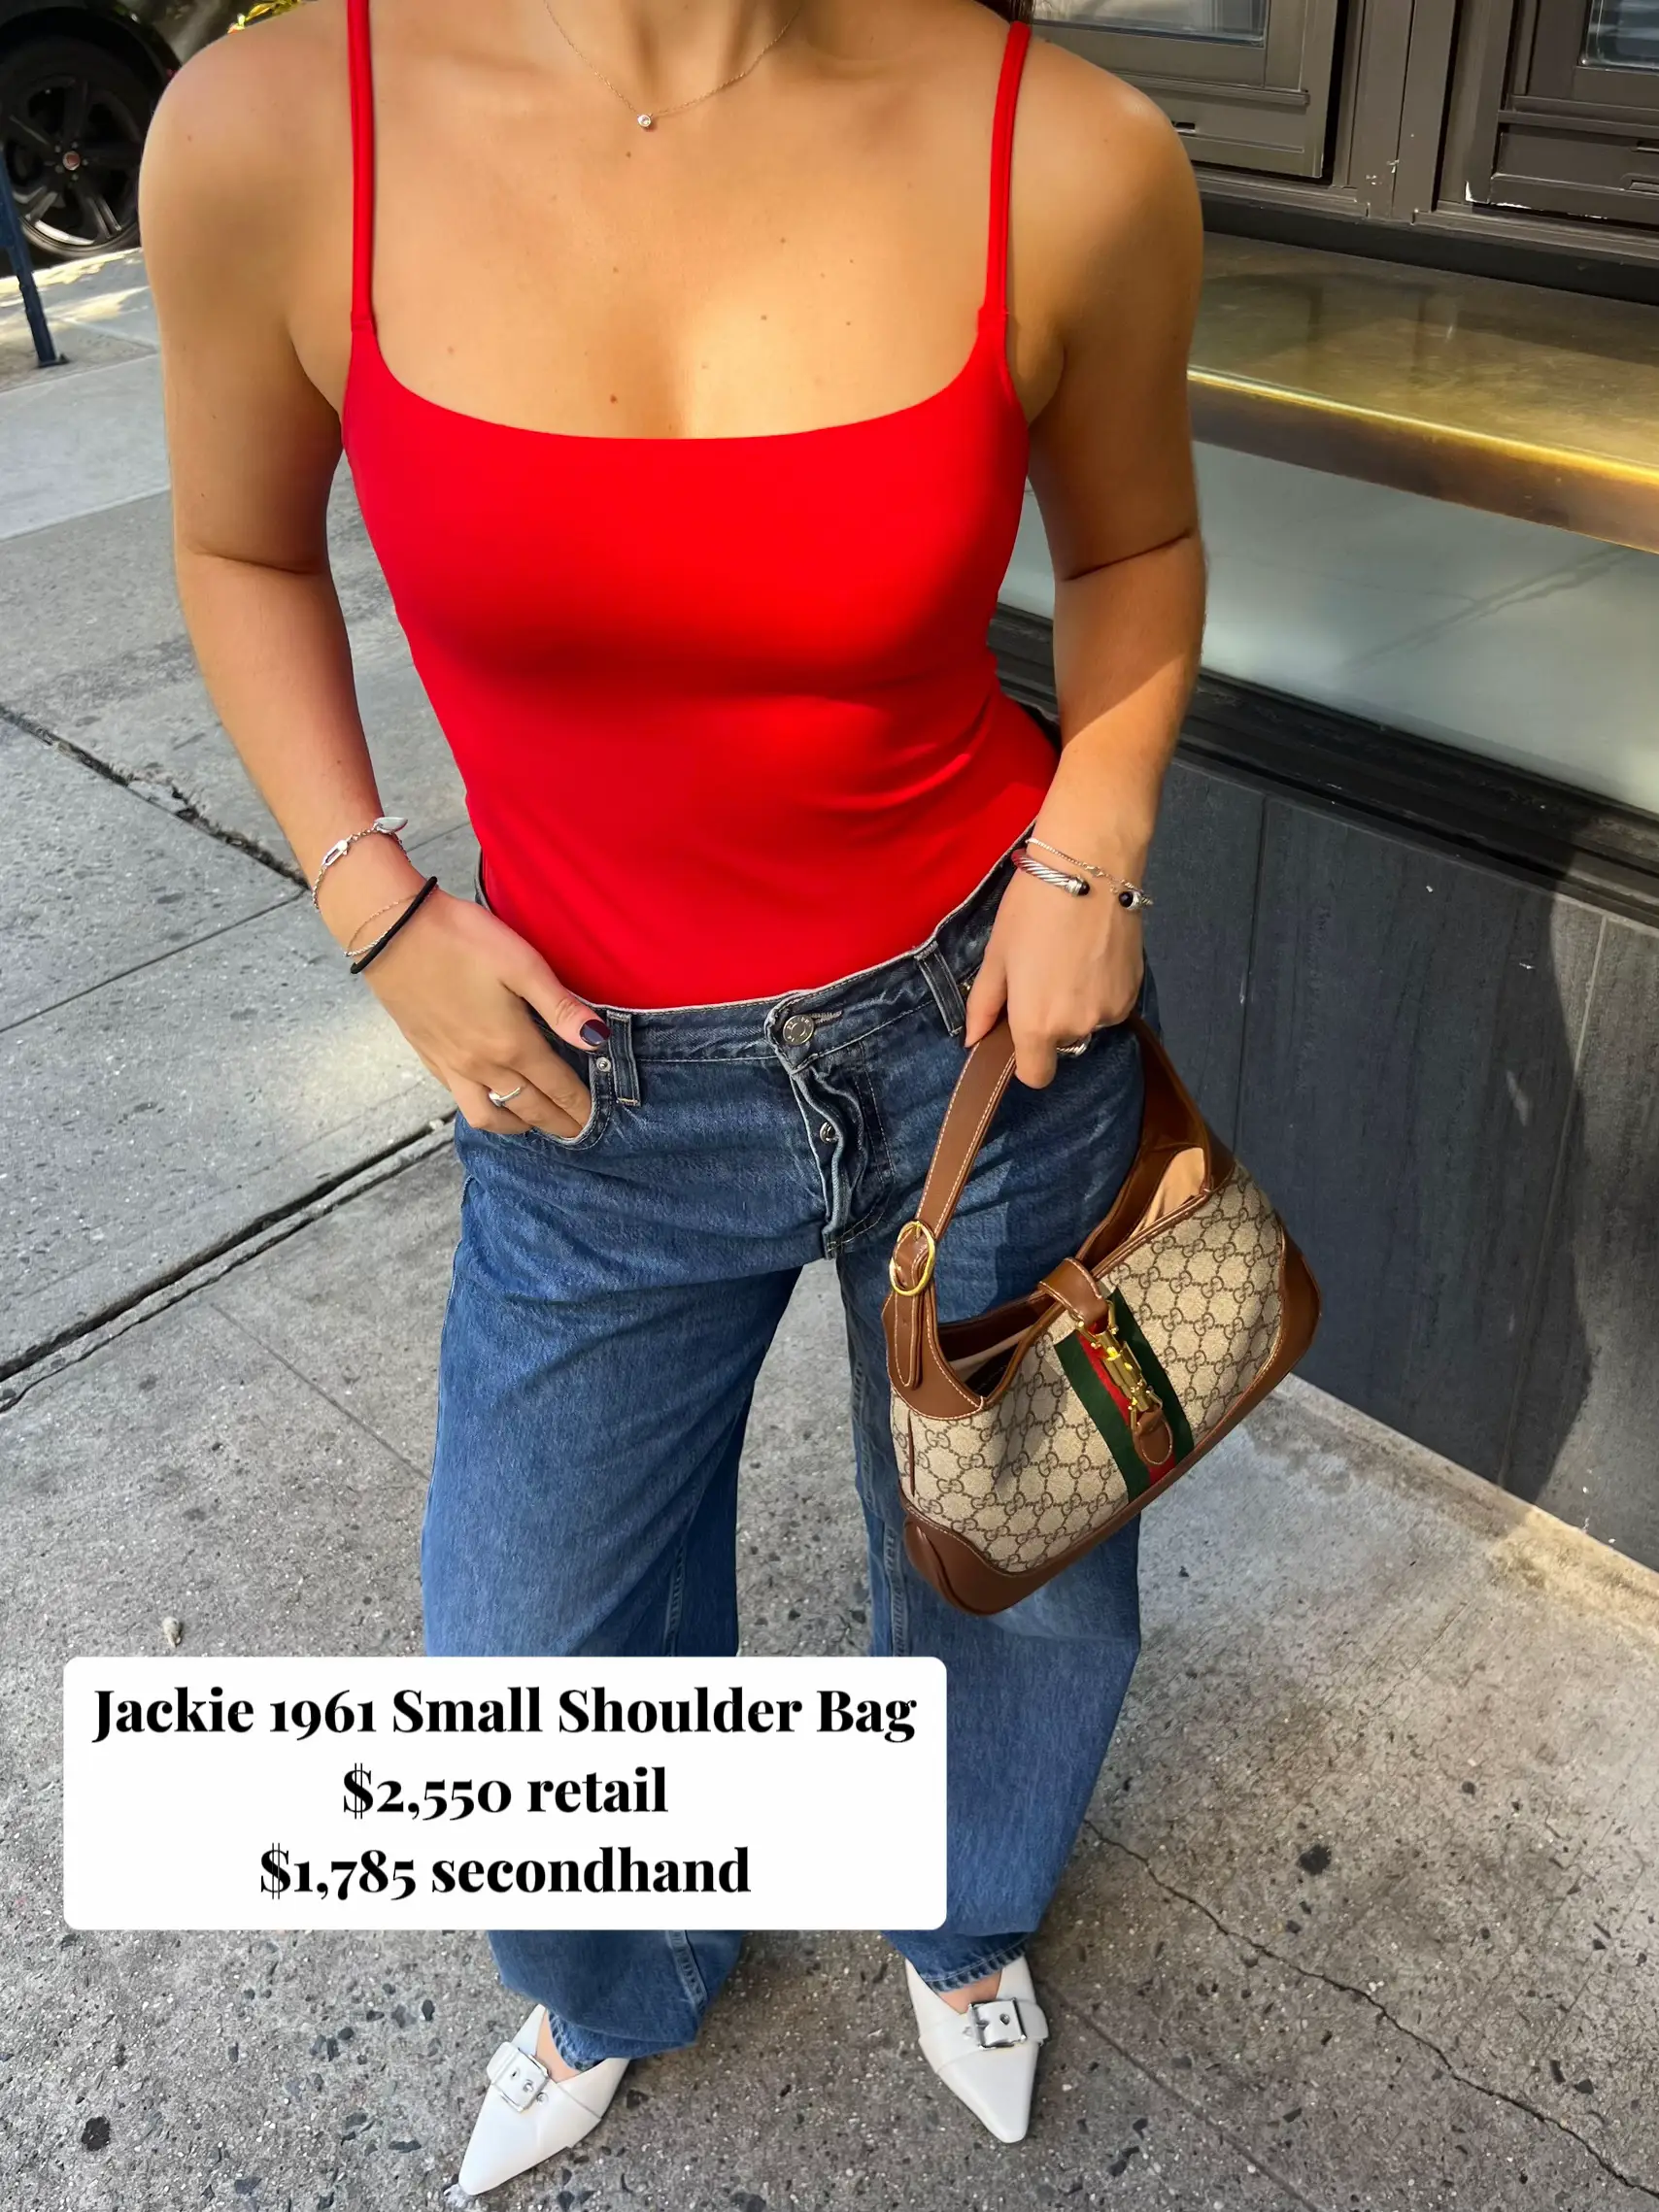 GUCCI JACKIE DESIGNER BAG REVIEW  Gallery posted by Sstephkoutss